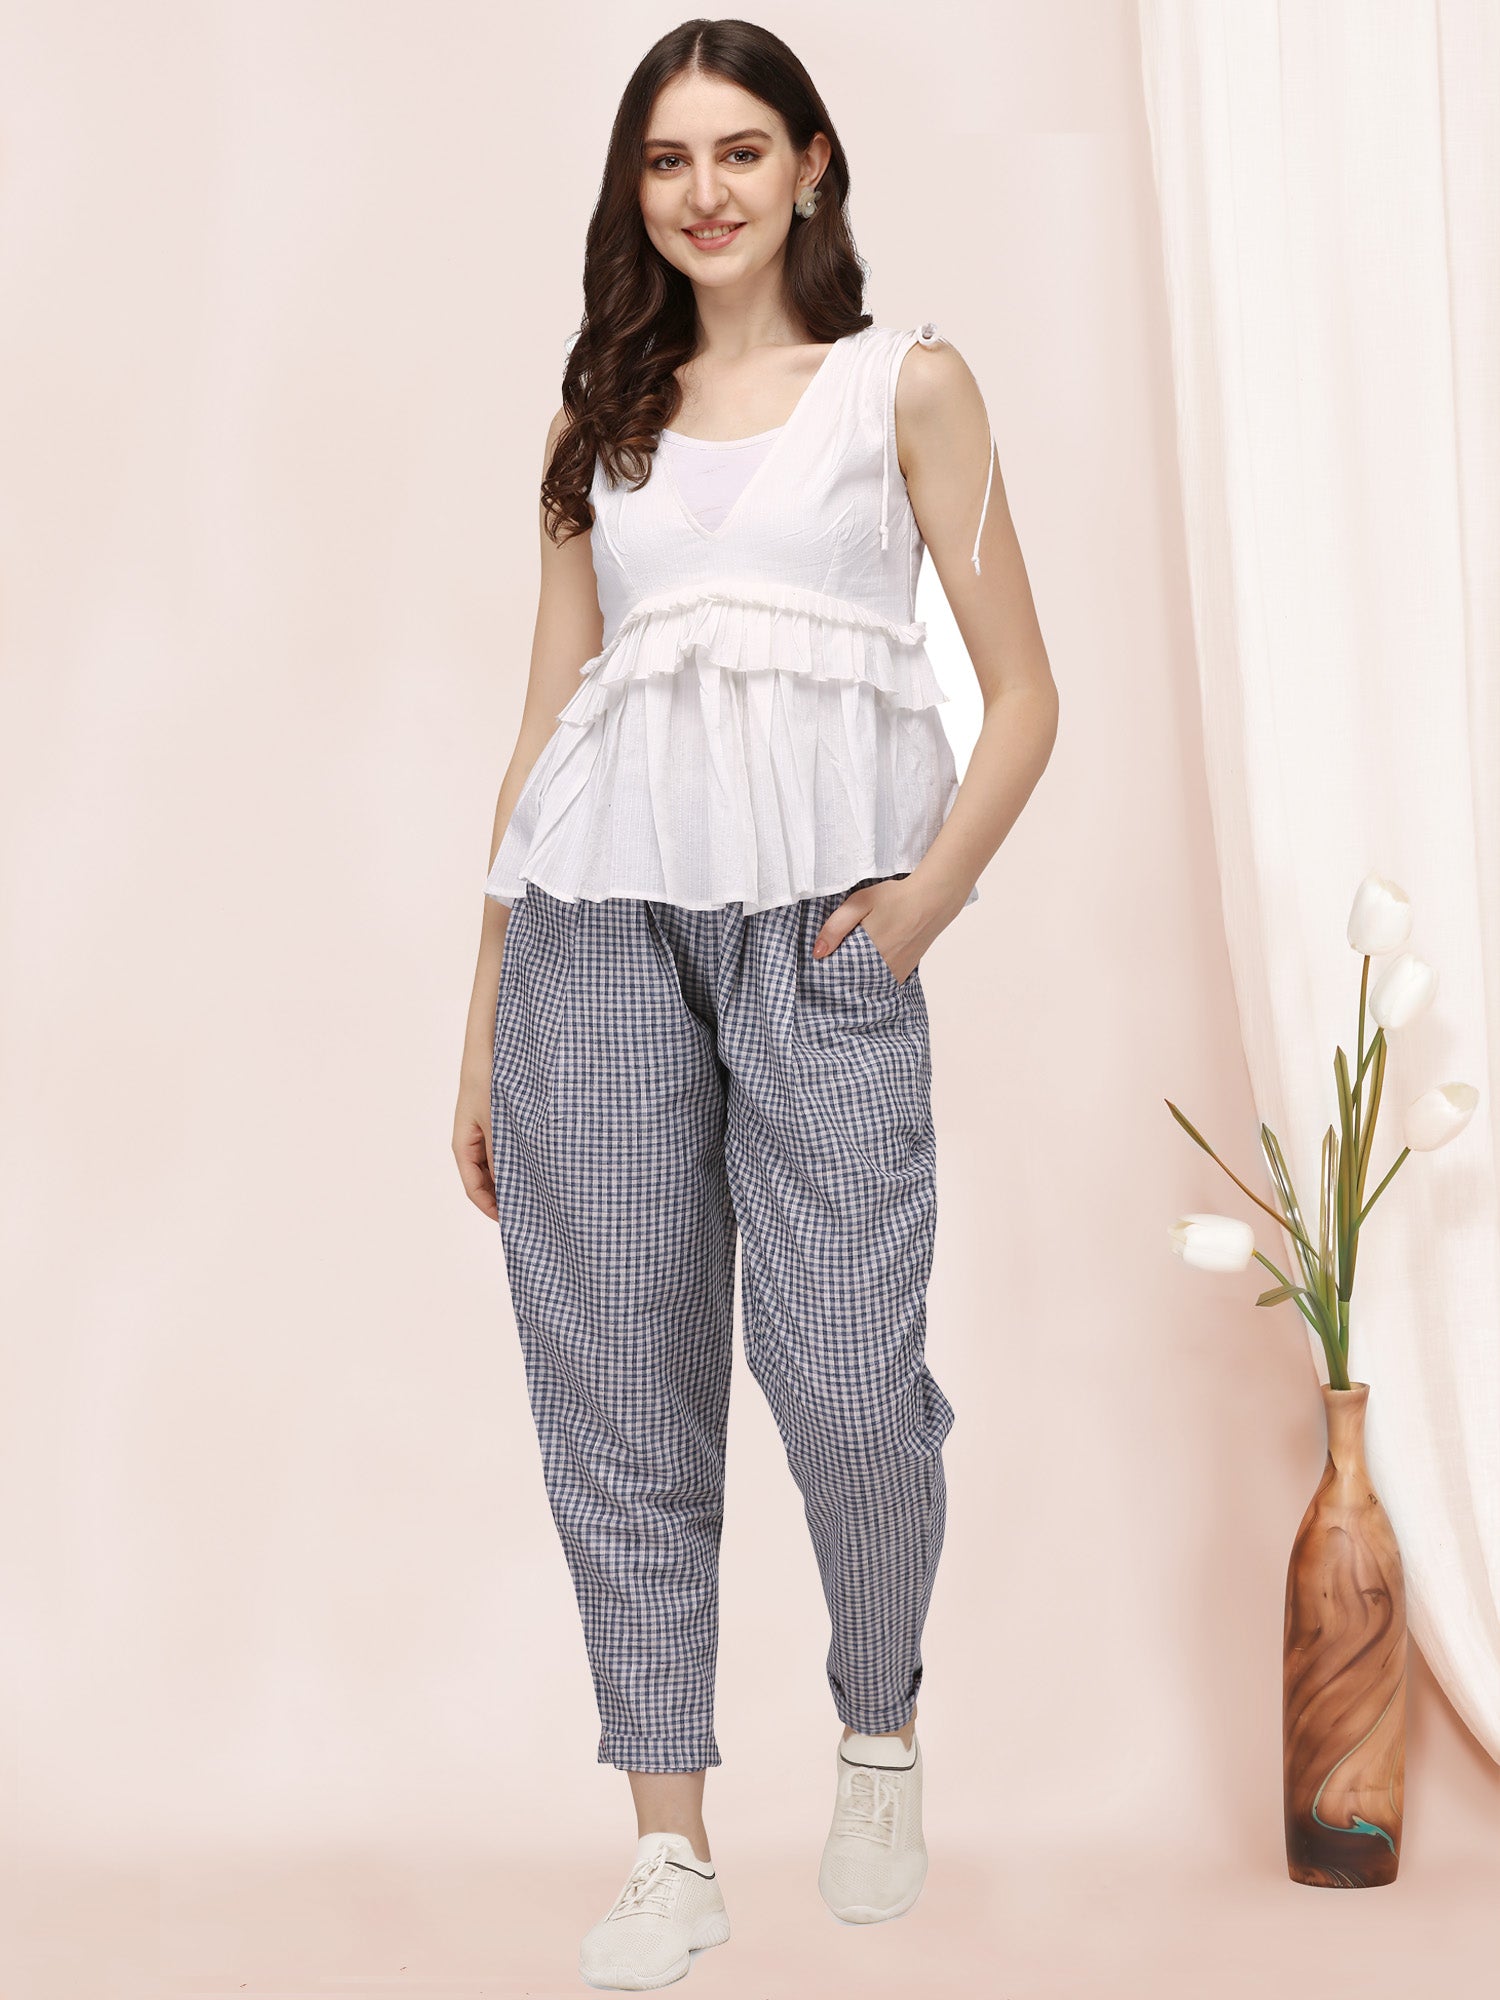 Women's White Sleeveless Ruffle Top Paired With Chex Casual Pant A Perfect Co-ordinates set - MESMORA FASHION